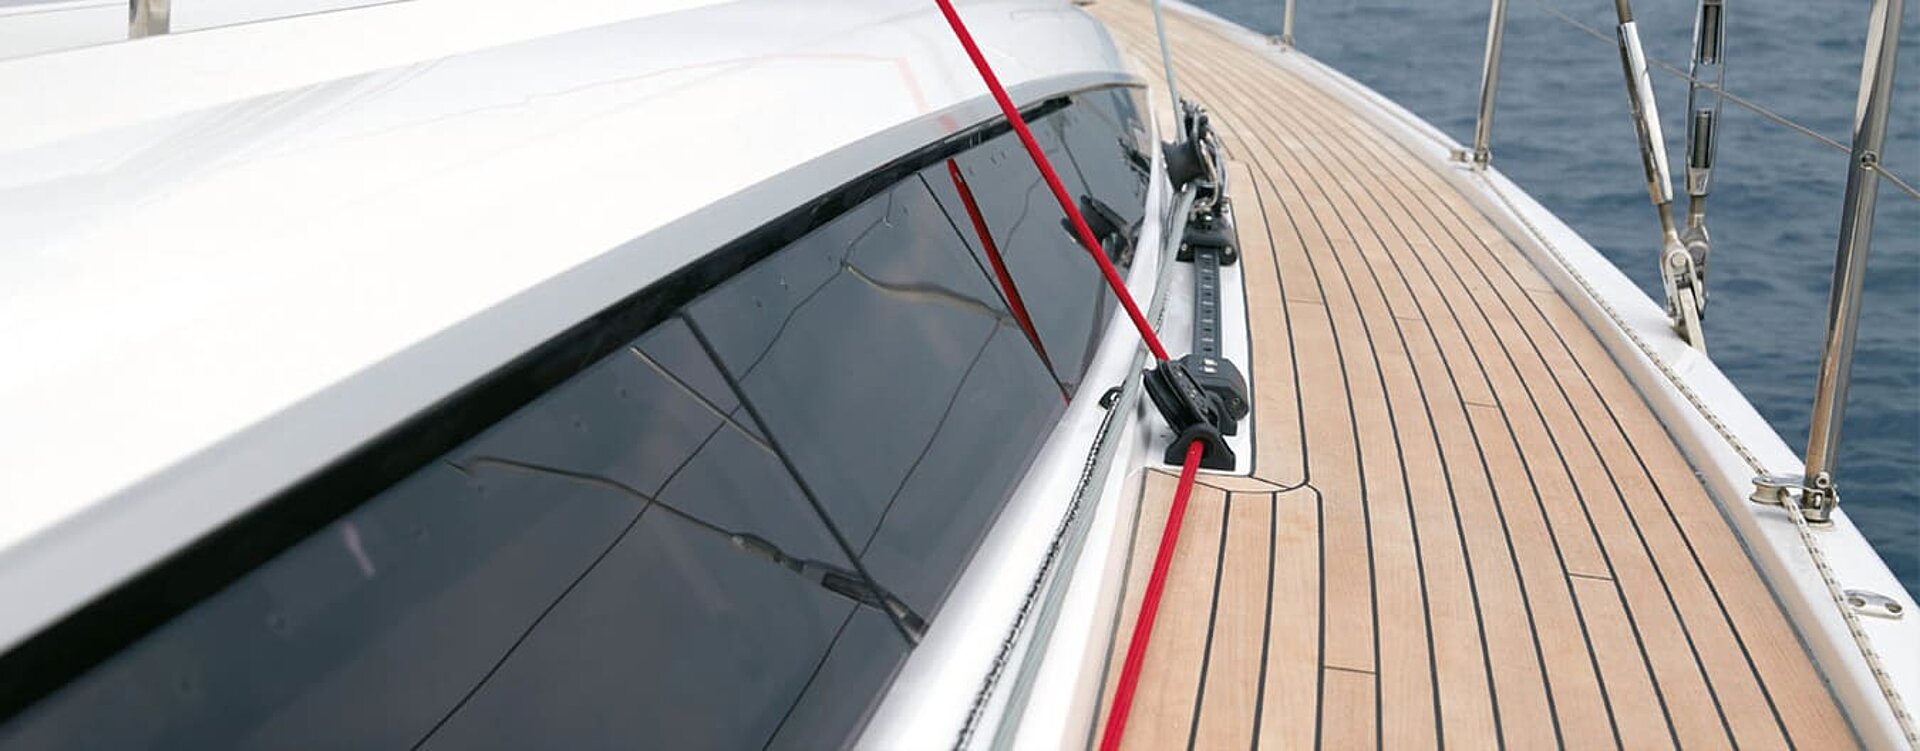 High quality racing boats, Sailing Yacht craftsmanship at its best